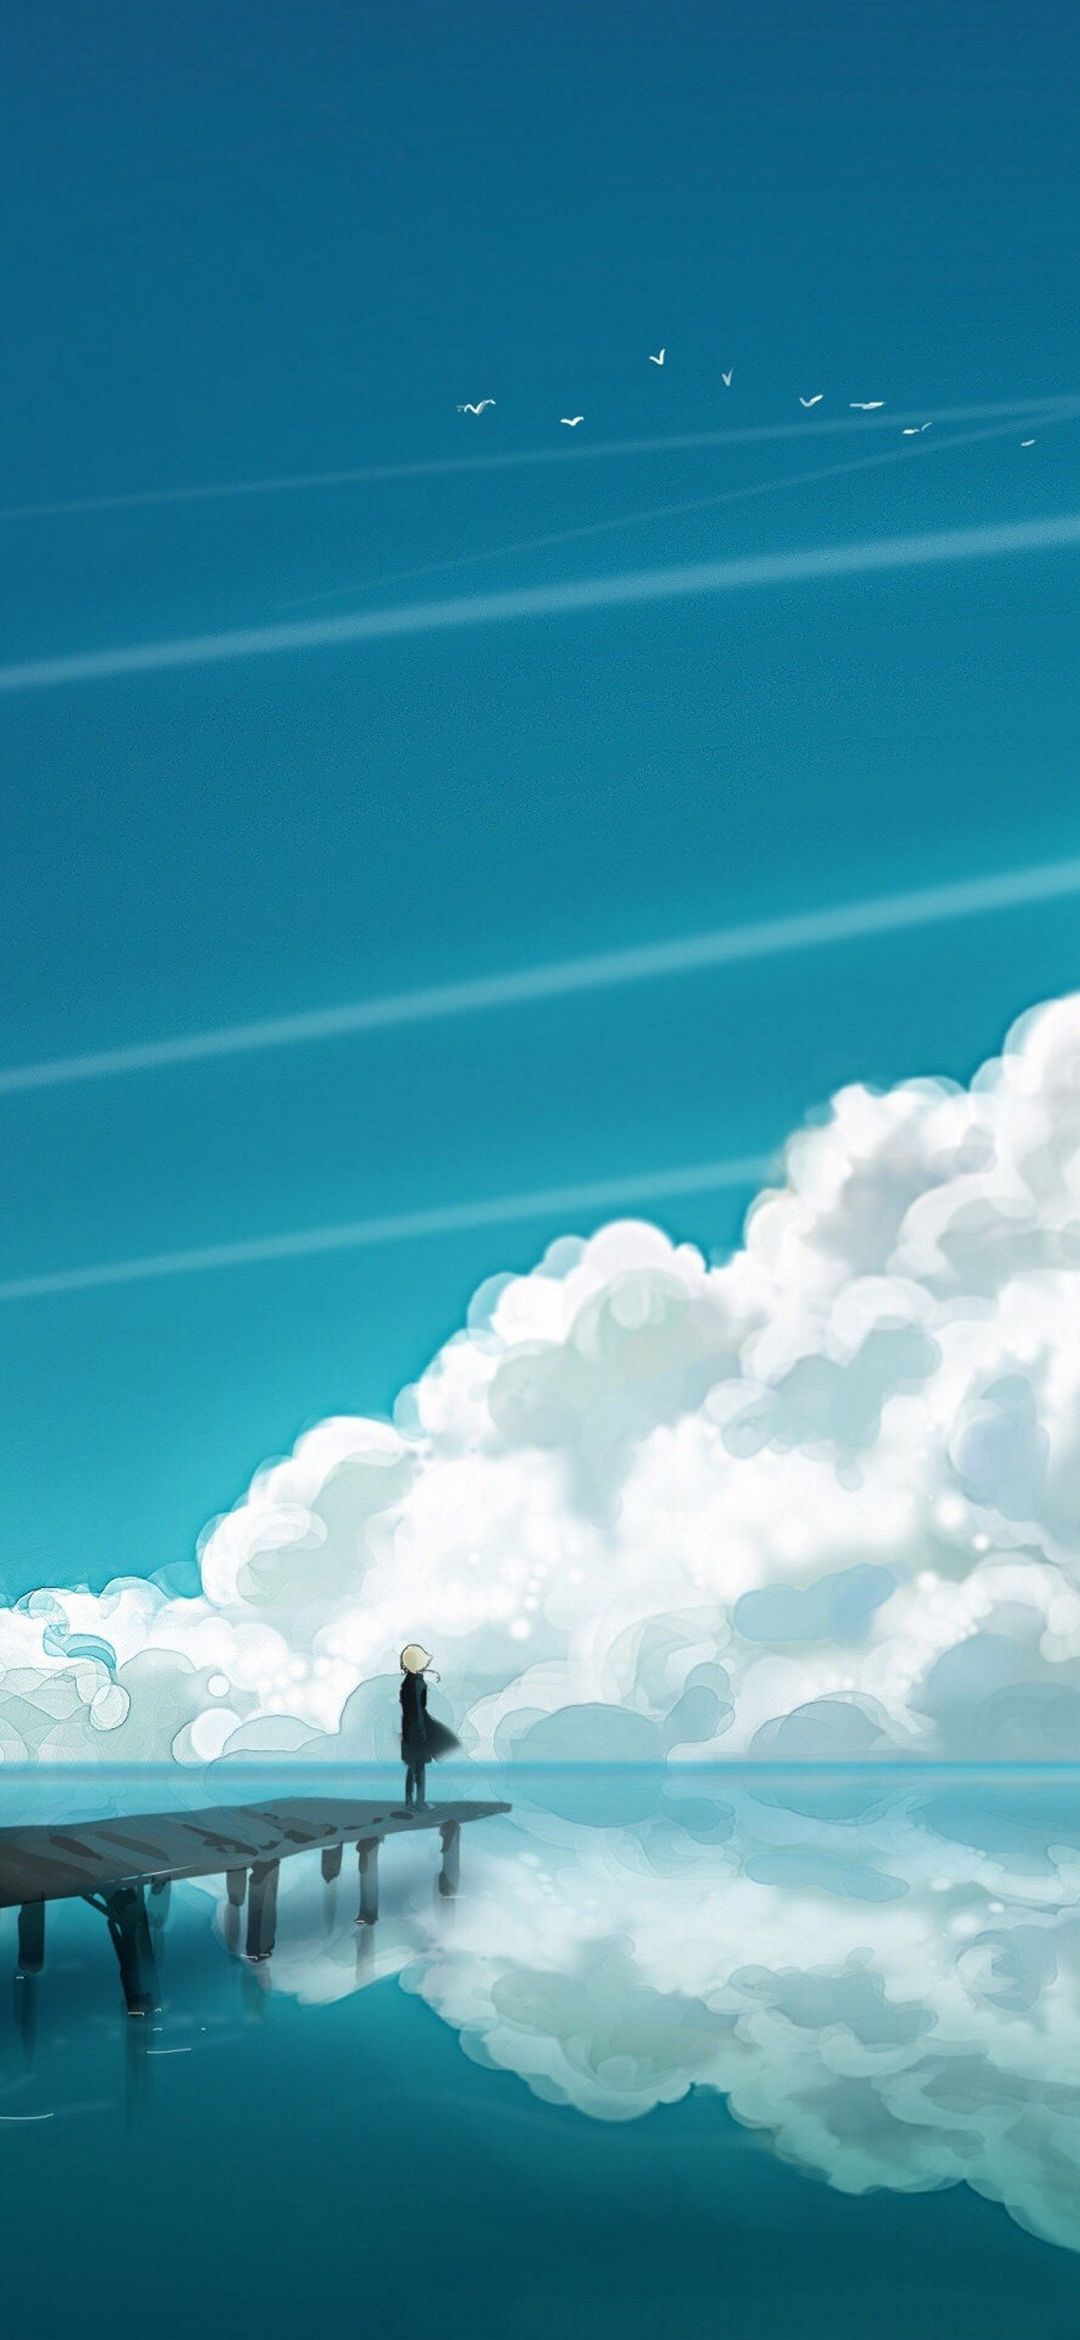 Mobile sky wallpaper in modern minimalist abstract